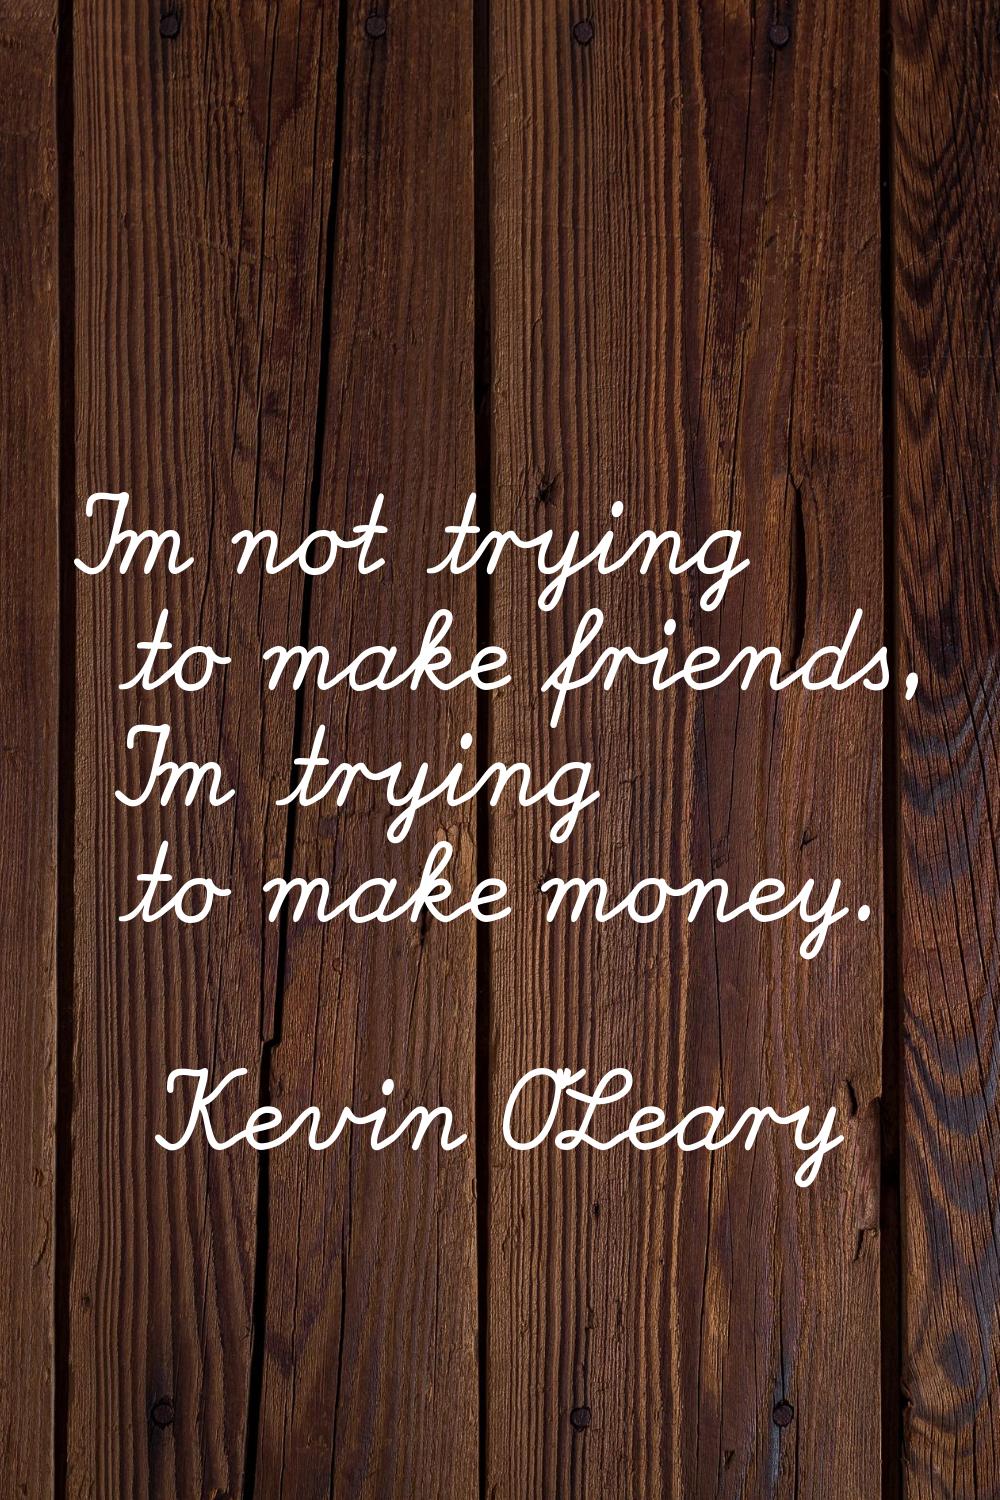 I'm not trying to make friends, I'm trying to make money.